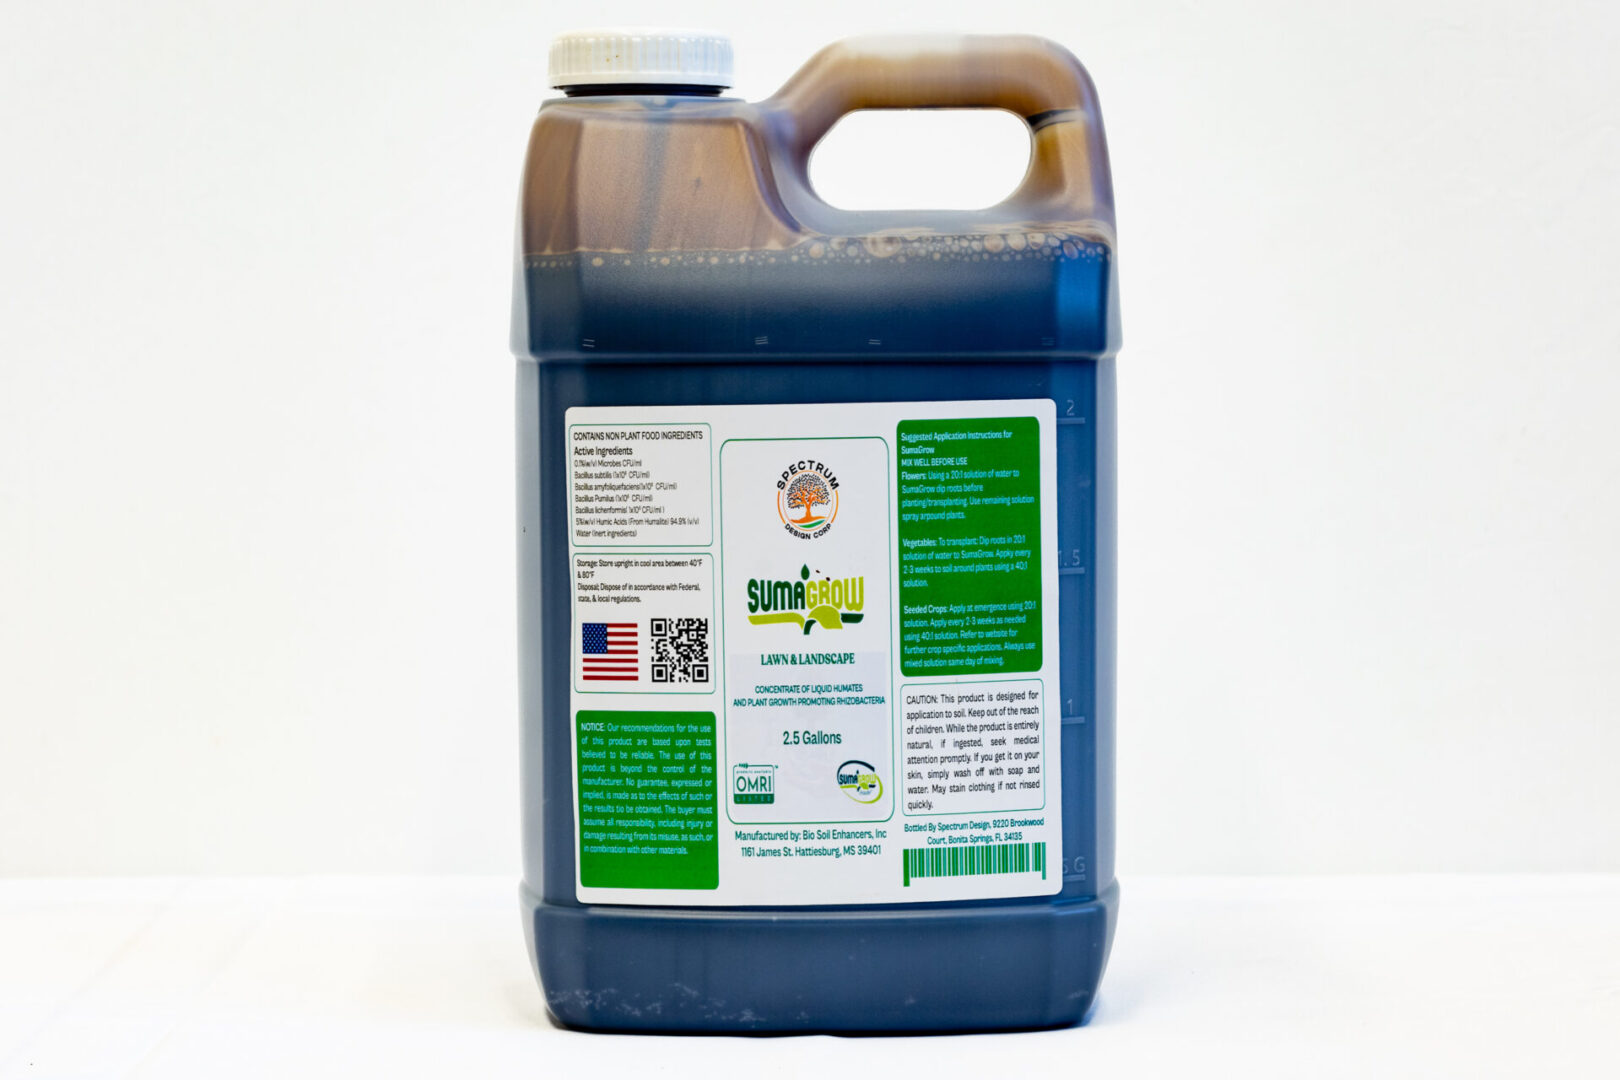 A gallon of green cleaning product is shown.